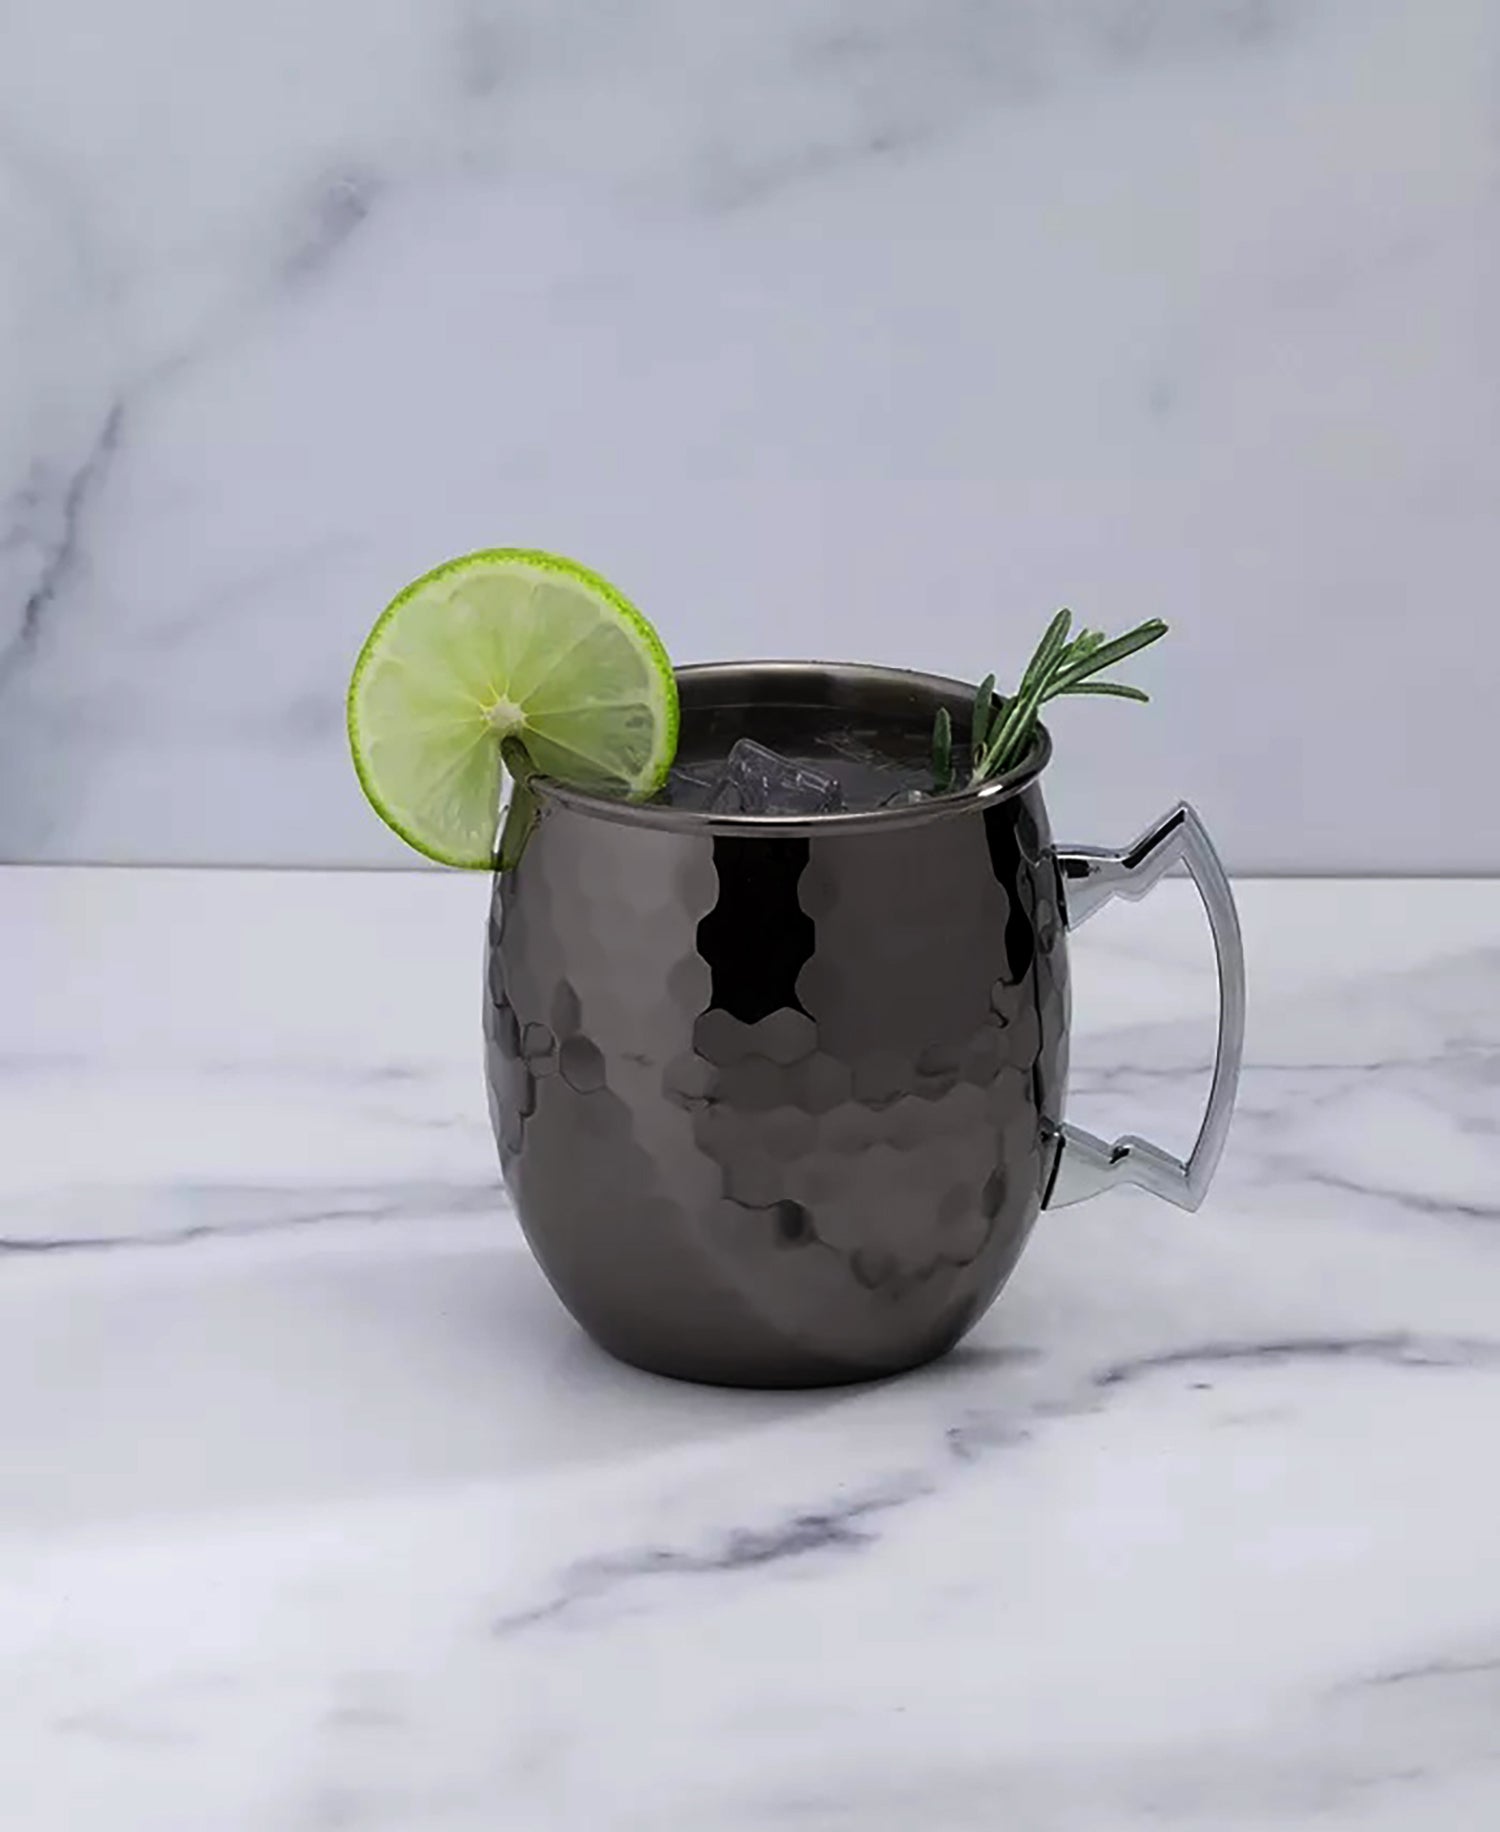 LMA Hammered Stainless Steel Moscow Mule Mug Set - 500ml - 2-Piece